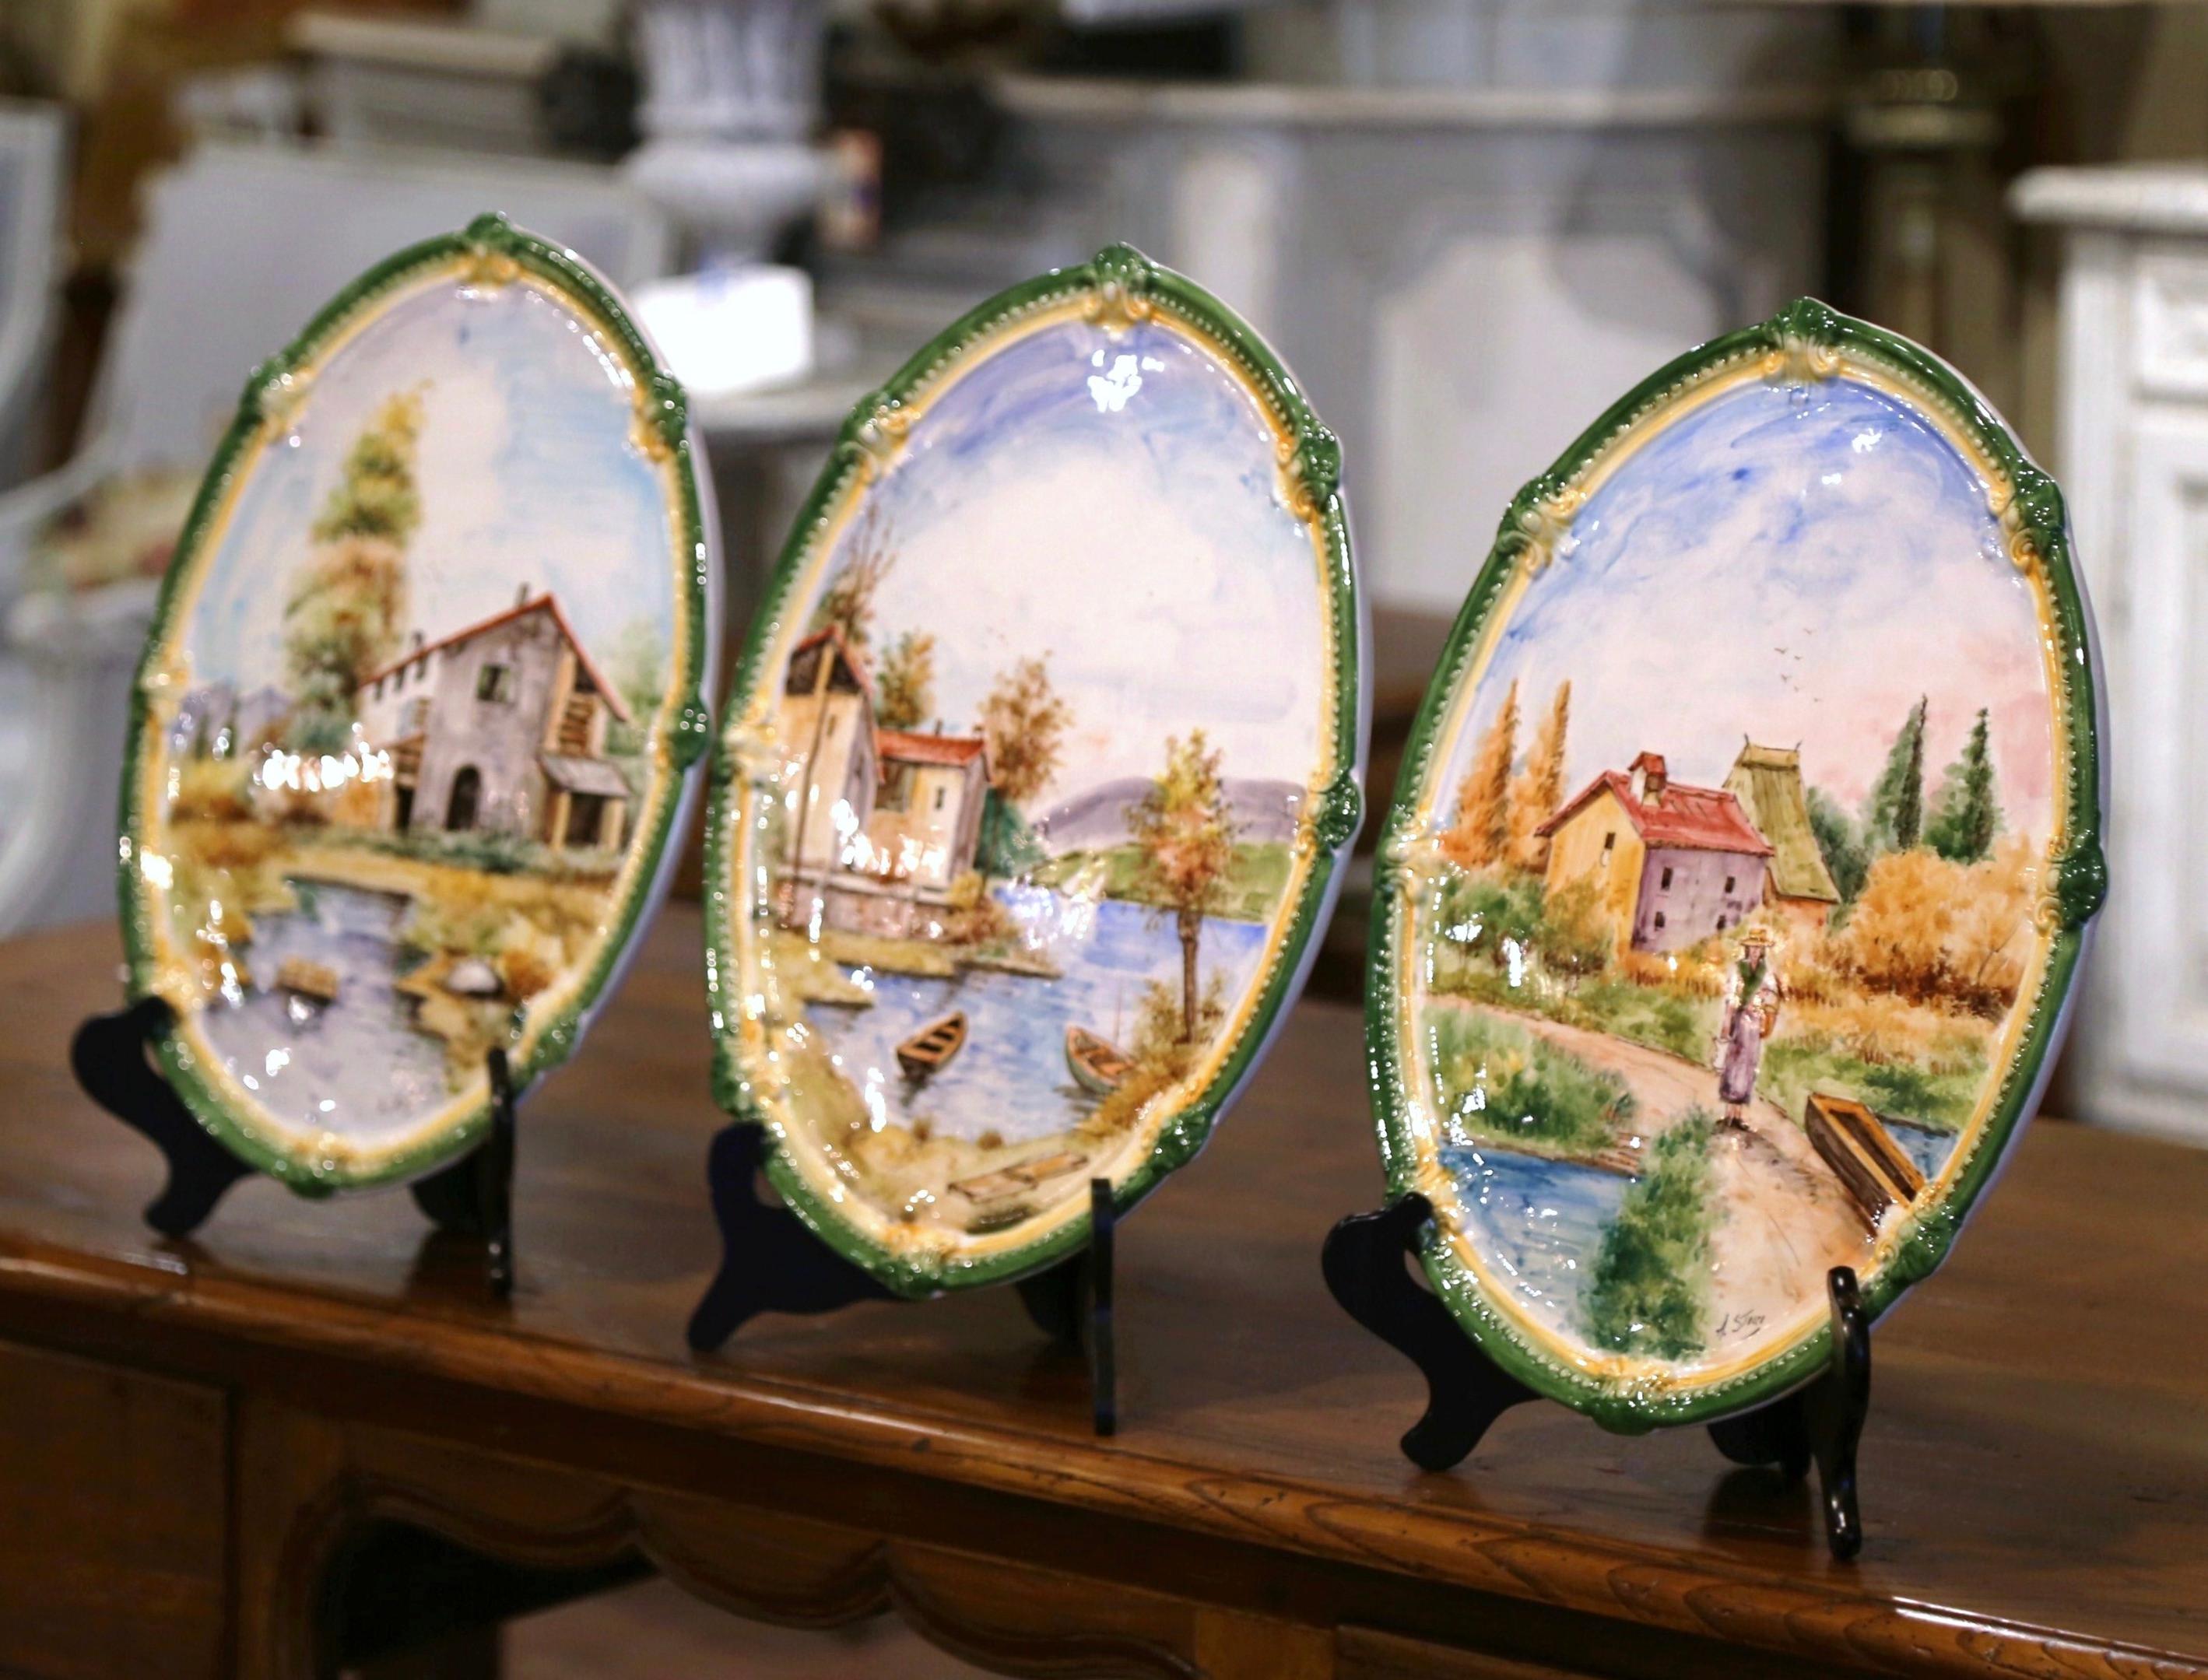 Decorate a kitchen wall or breakfast room with this elegant set of wall platters. Crafted in Italy circa 1980, each plaque depicts a typical Italian country scene with landscape, farm house, lake, boat, trees and peasant people. Every plate features